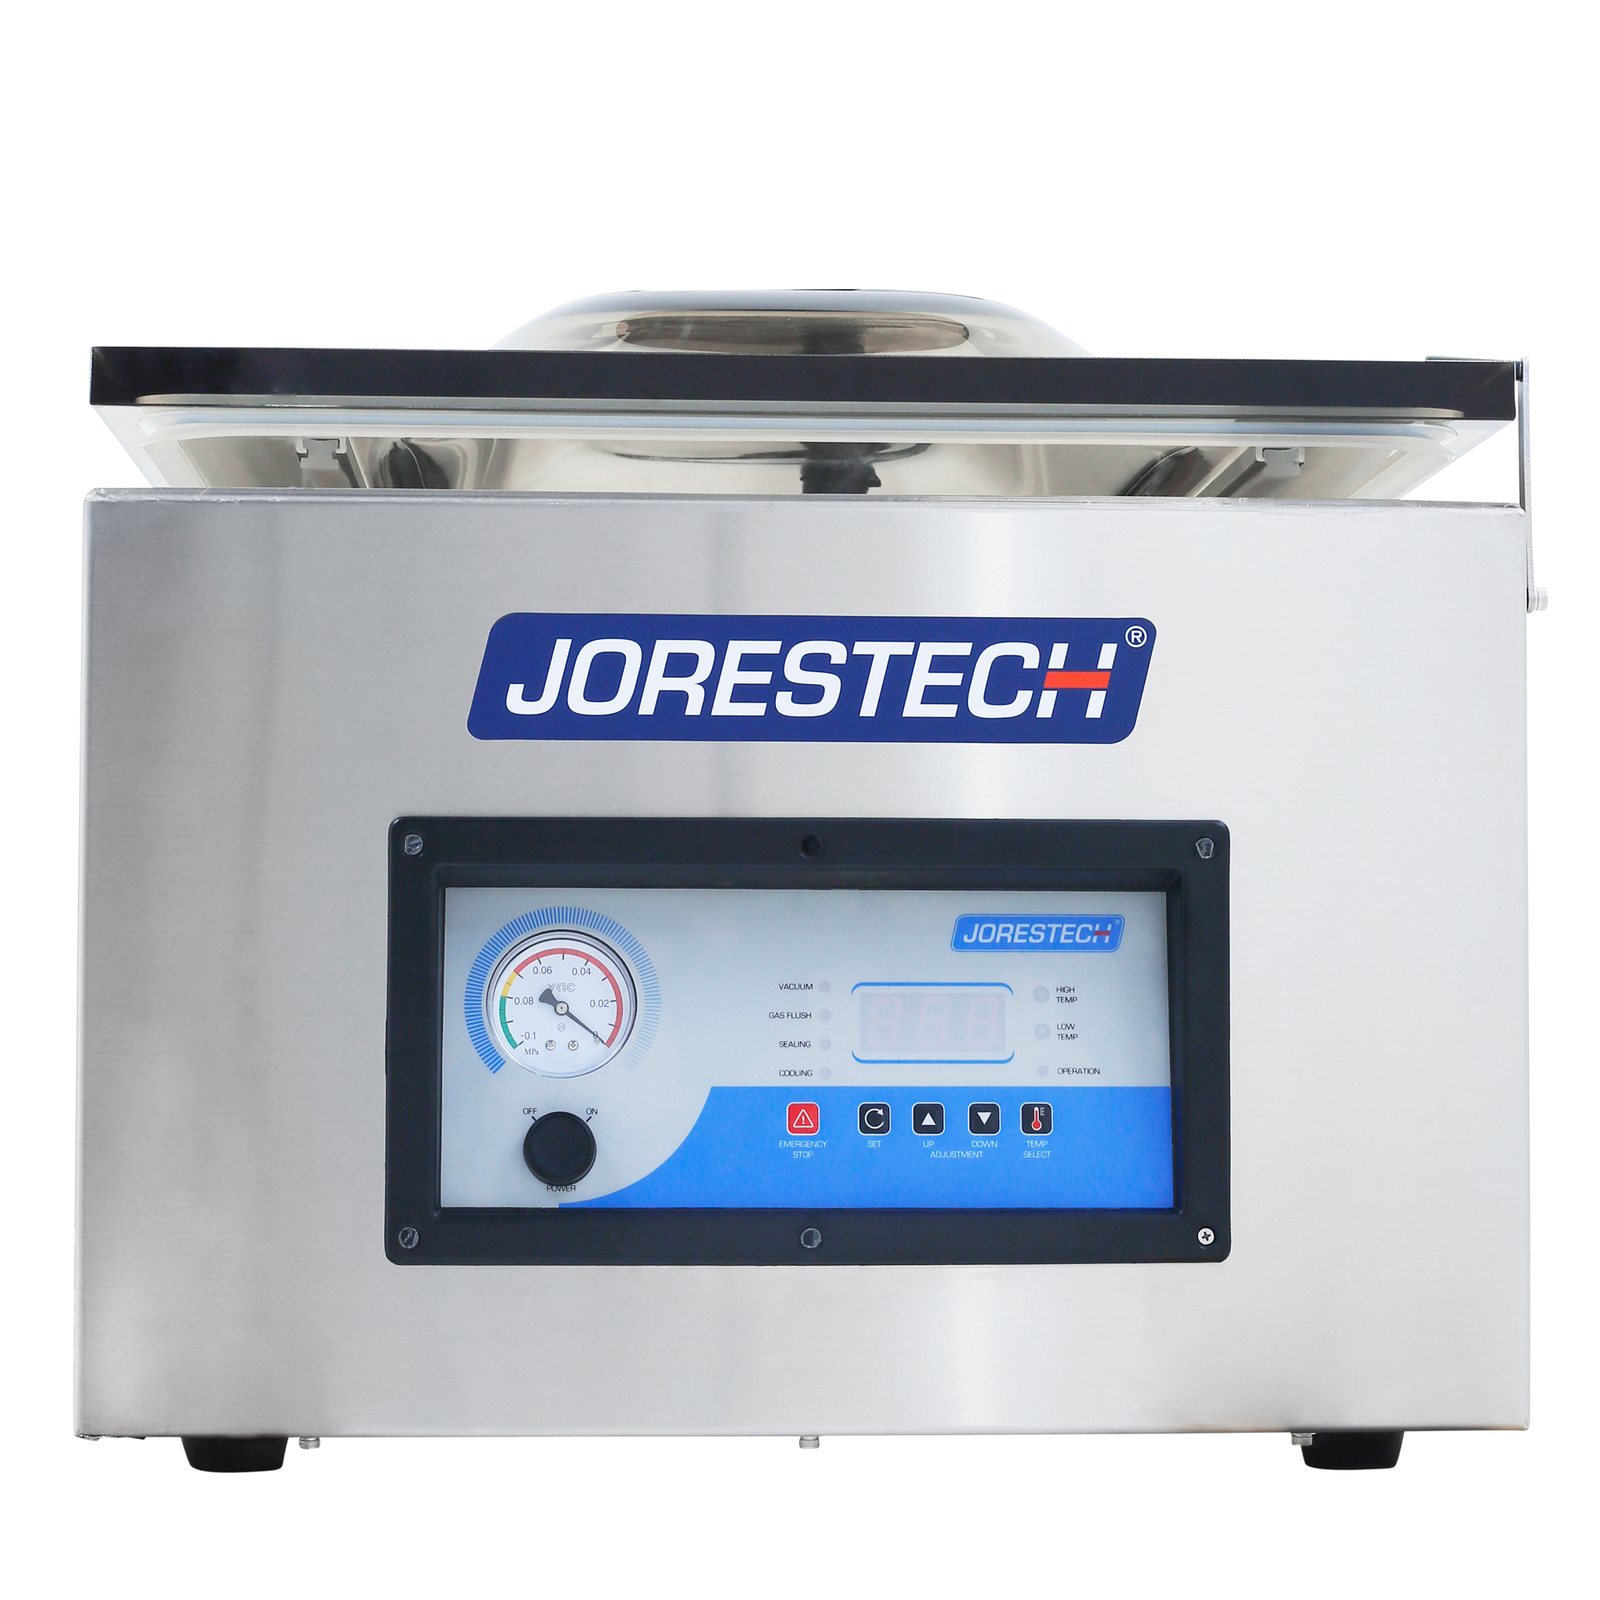 Front of the stainless steal JORESTCH tabletop commercial single chamber vacuum sealer with dual seal. The lid of the vacuum sealer is closed with the holding bracket